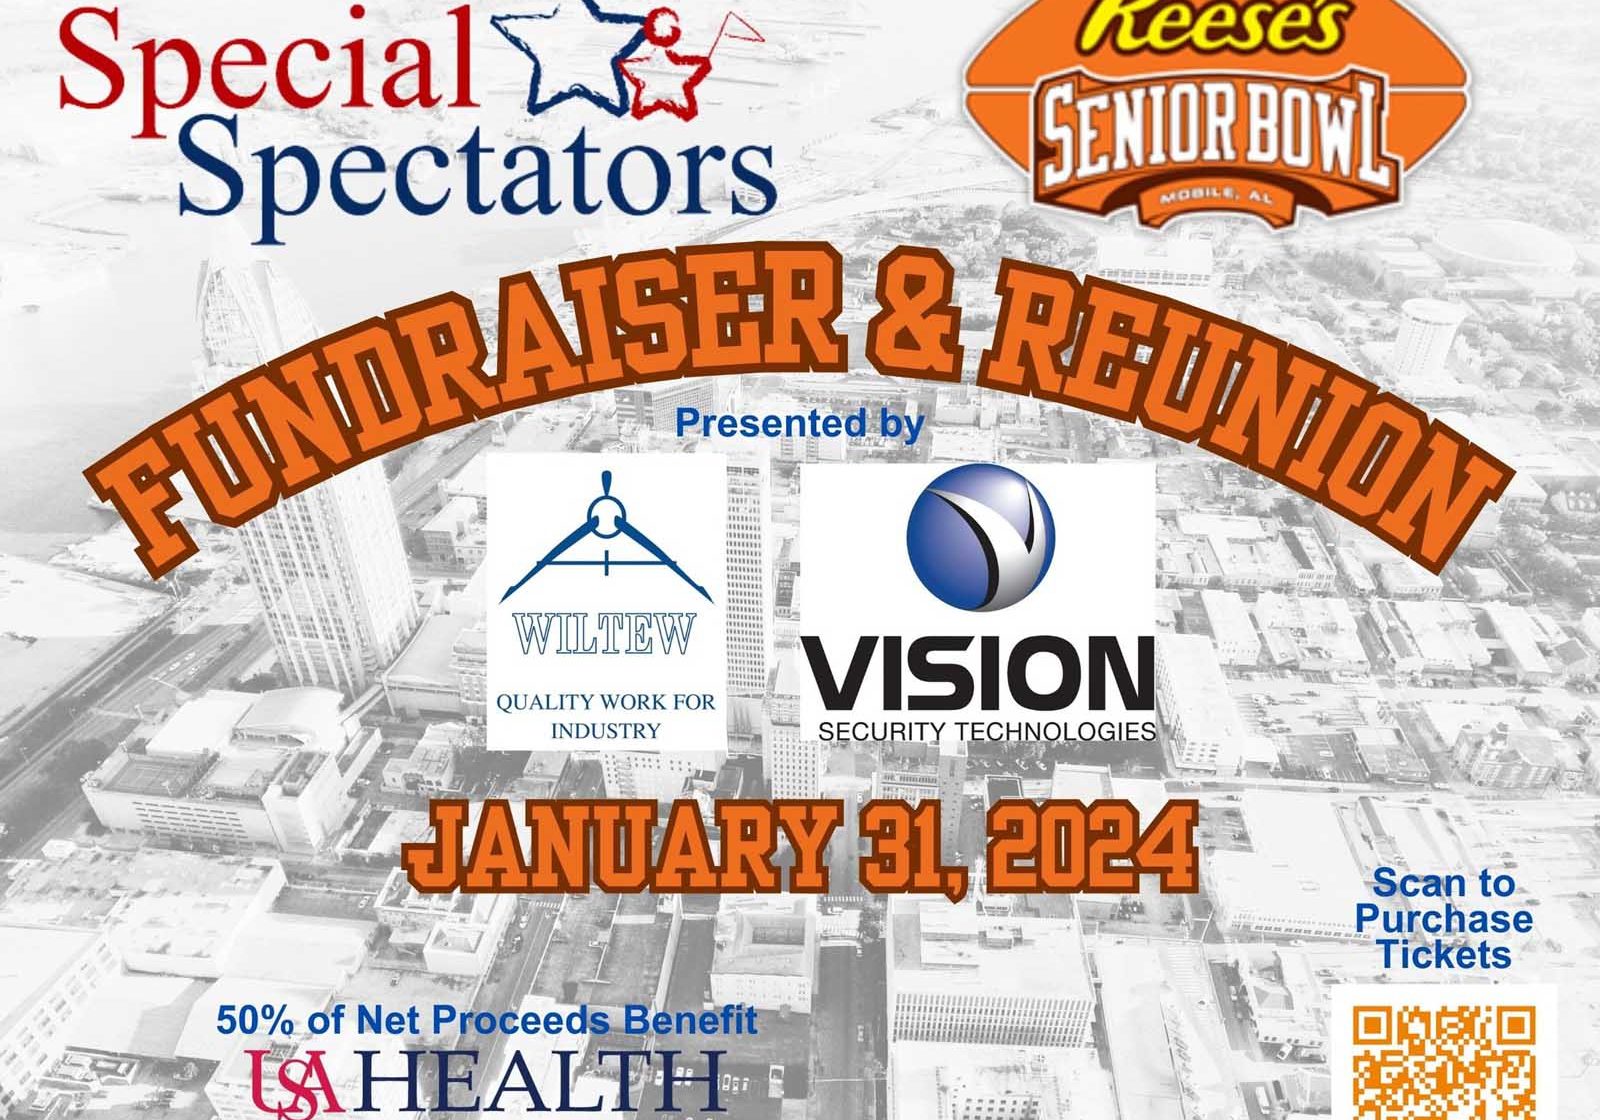 Special Spectators Partners With Senior Bowl